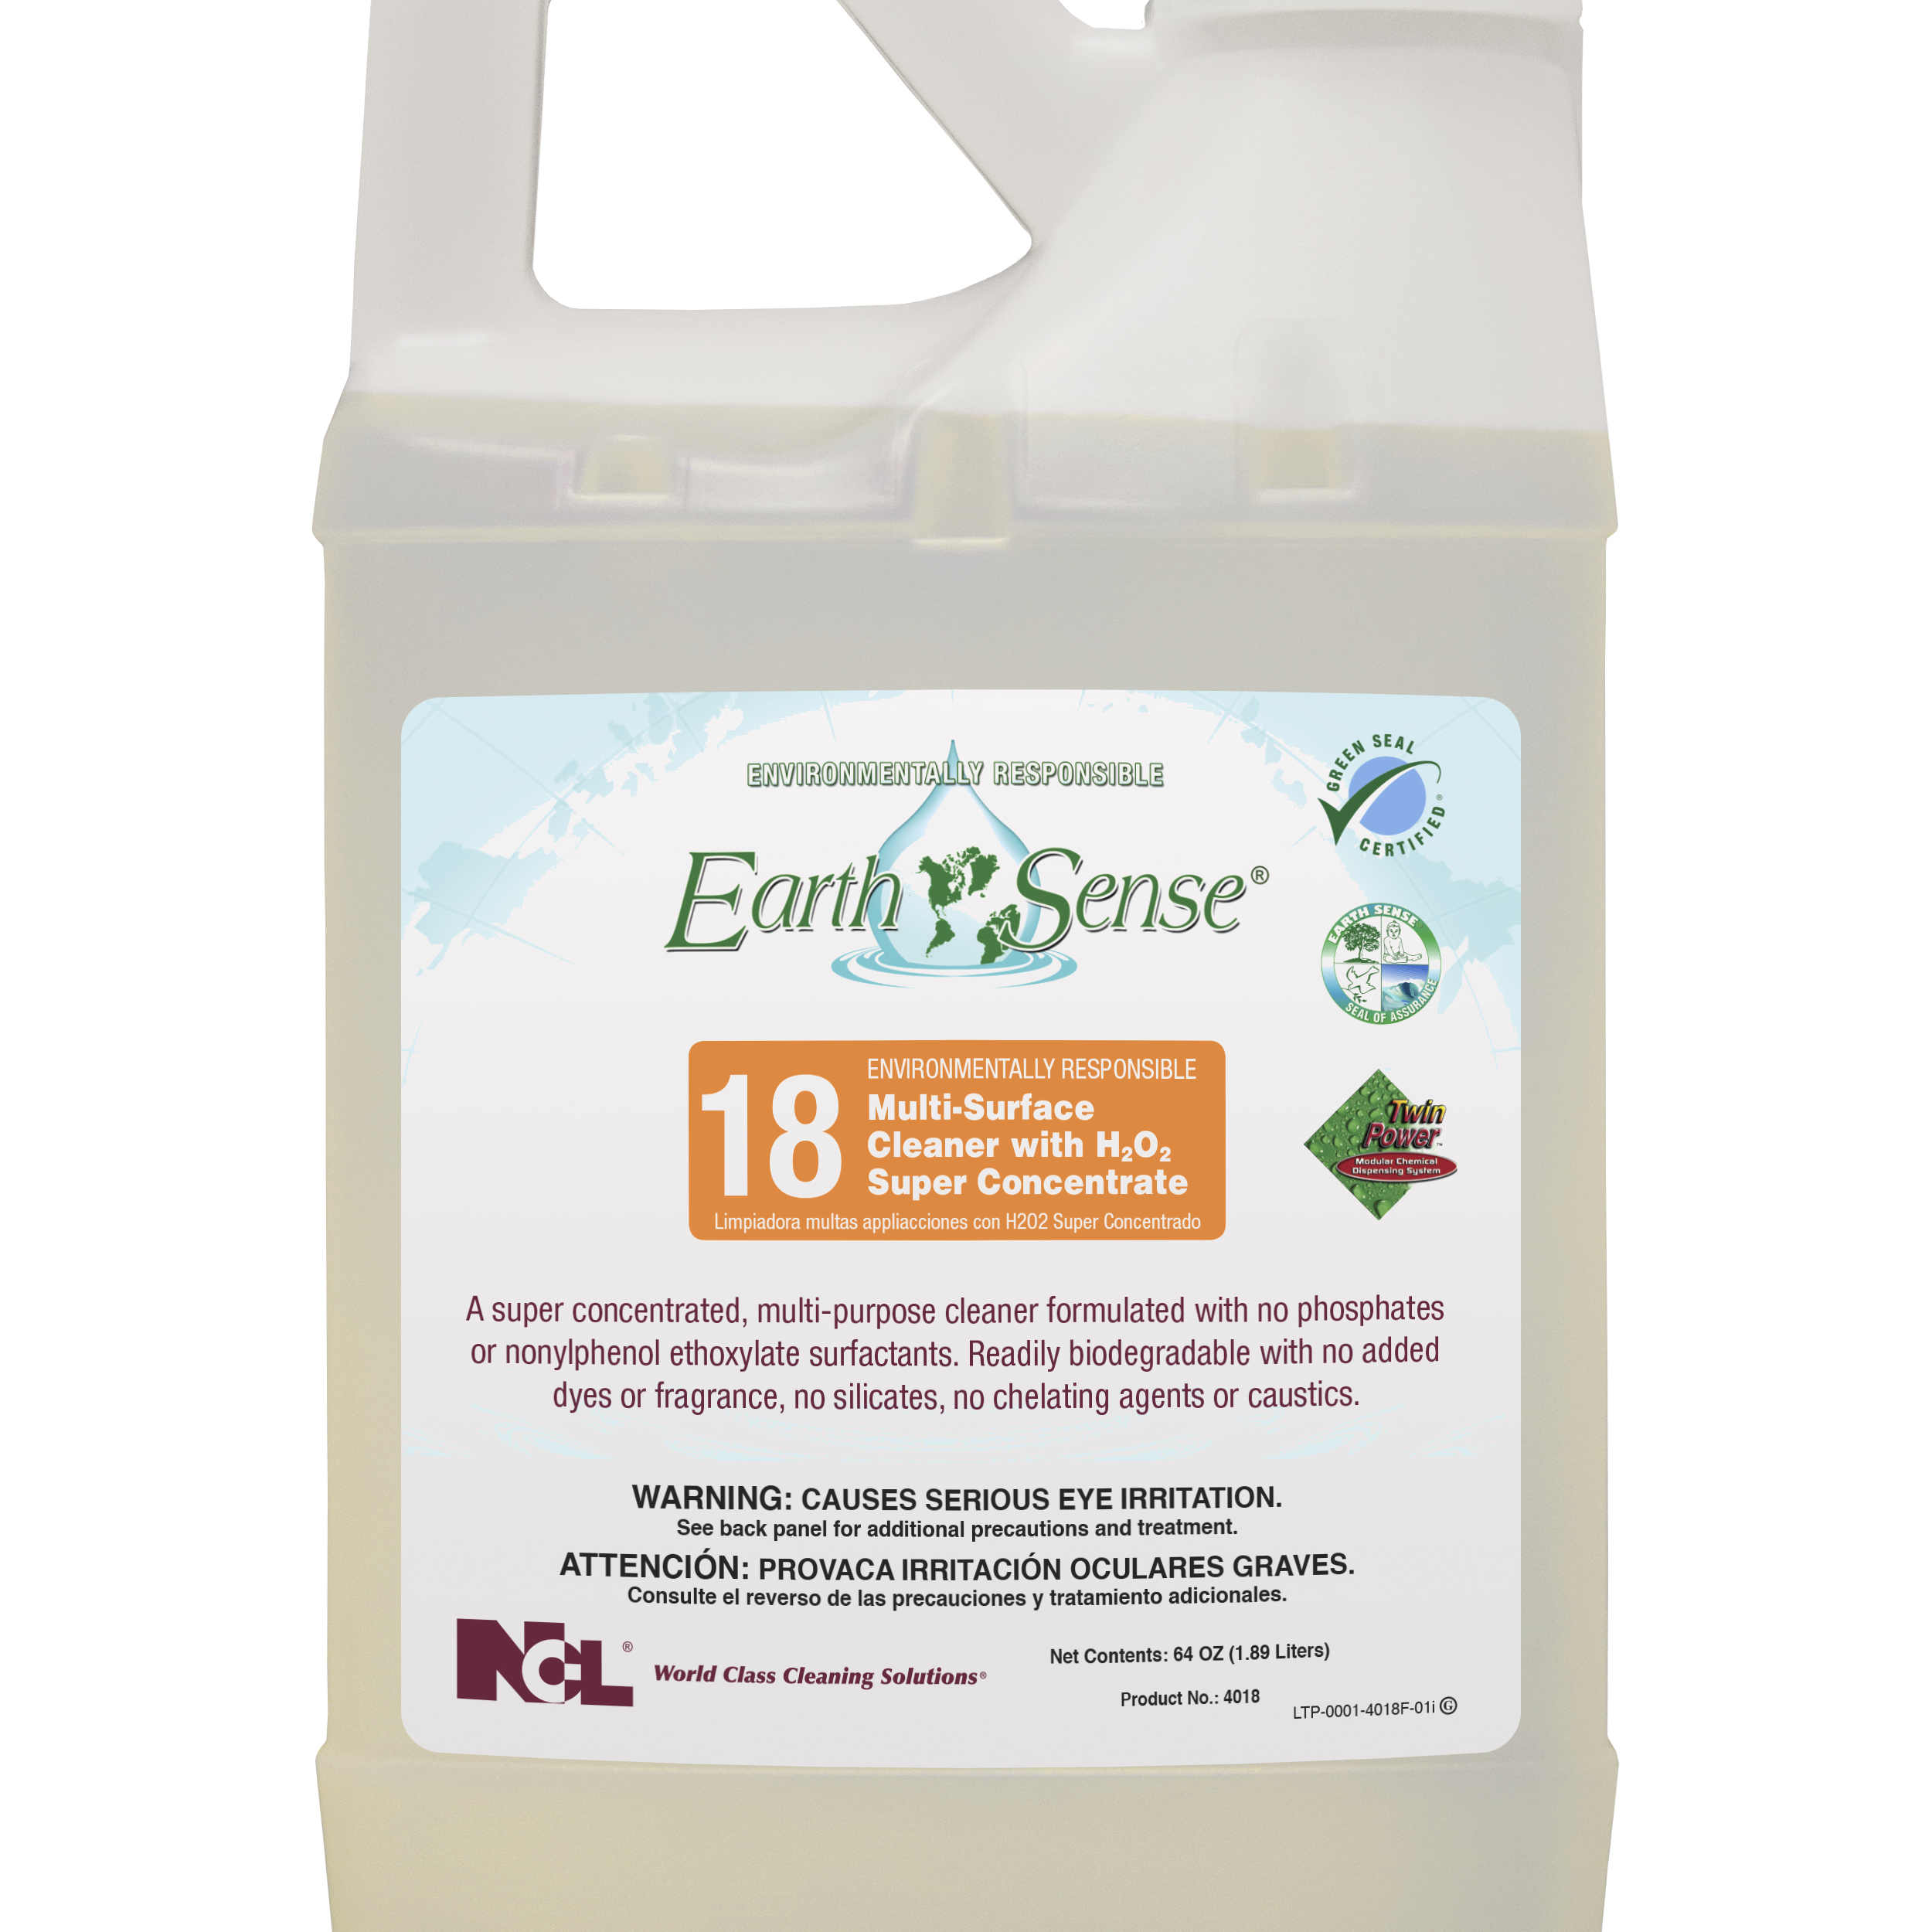  Earth Sense #18 MULTI-SURFACE CLEANER WITH H2O2 SUPER CONCENTRATE 6/64 oz Case (NCL4018-65) 